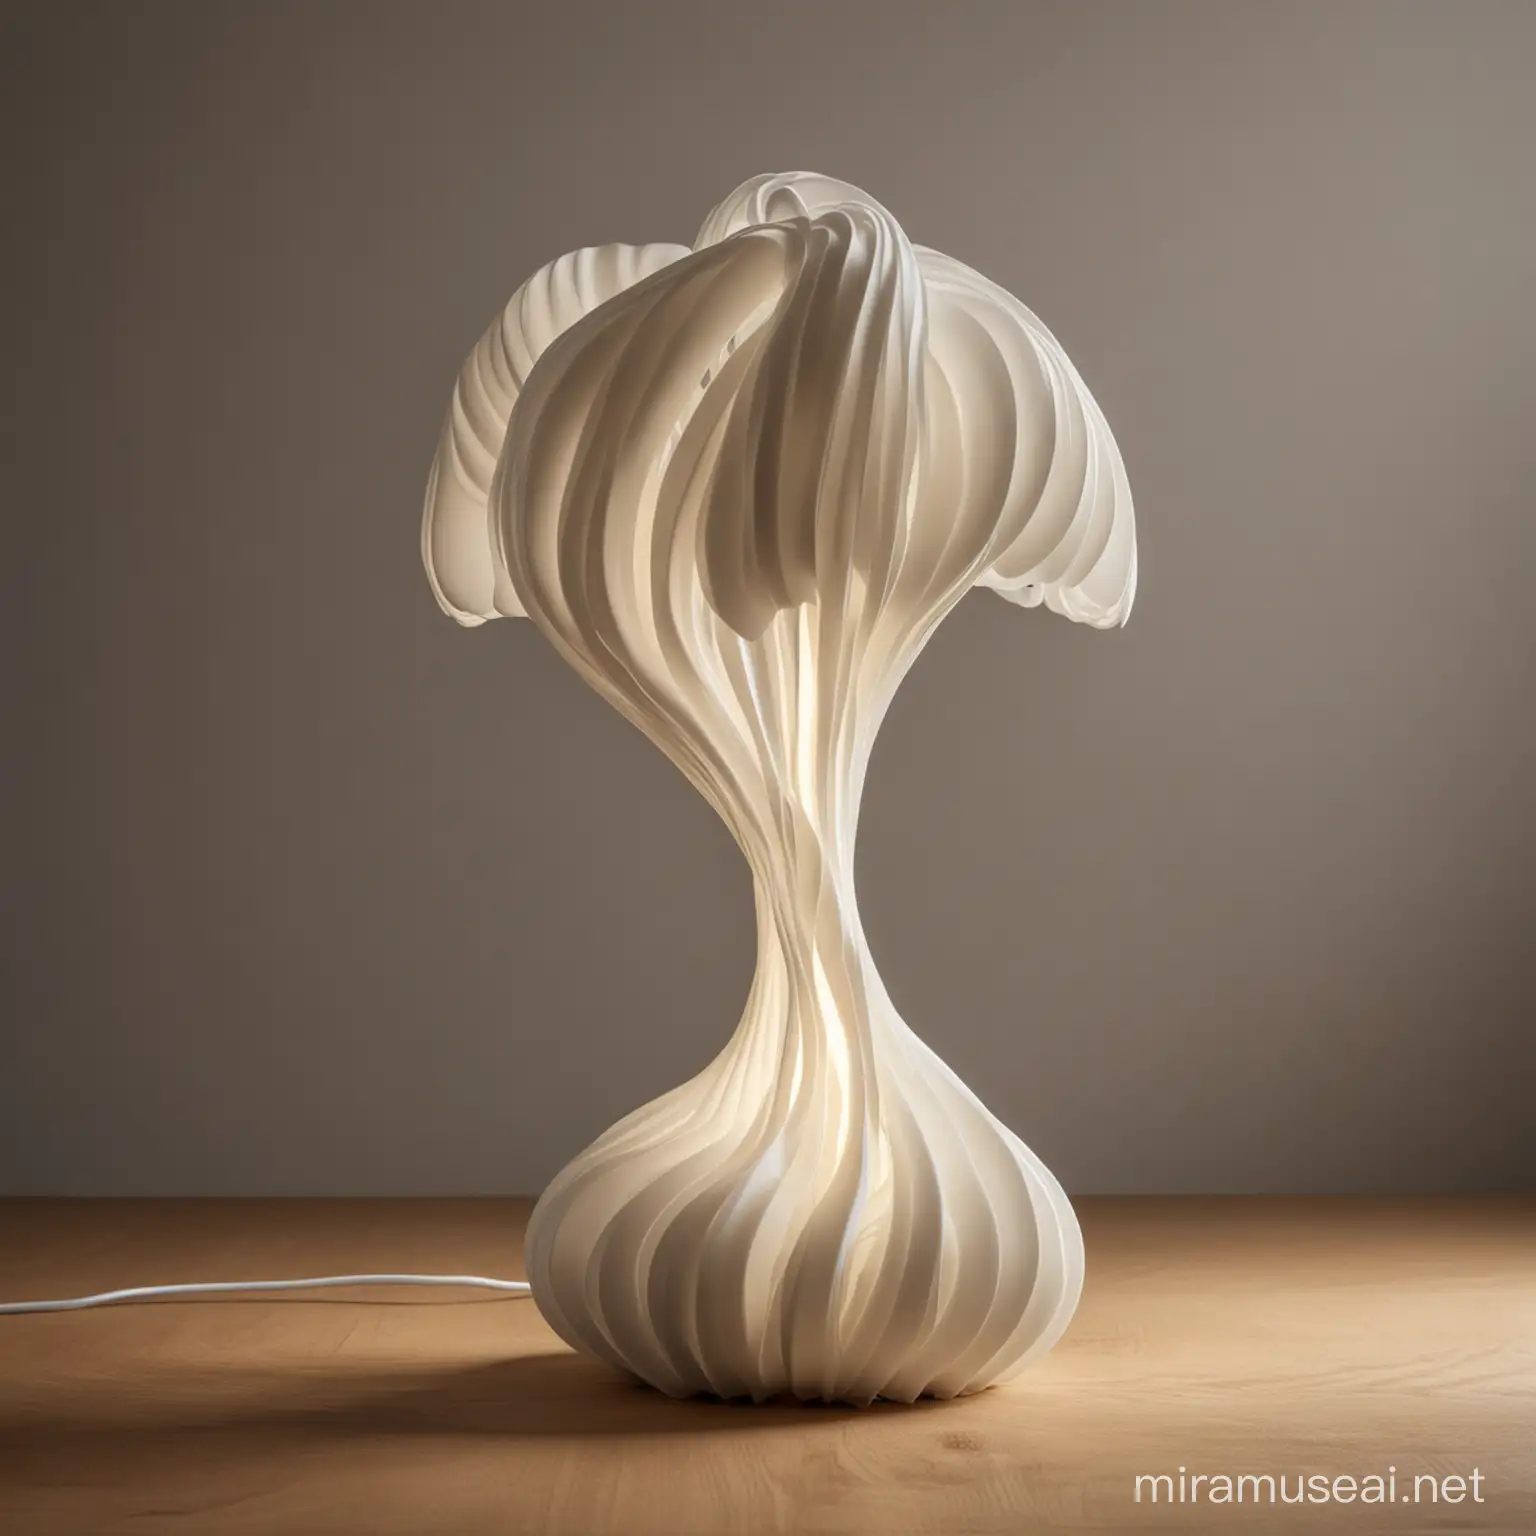 A 3D printed free form, Ron Arad-style lamp, cinematic looking with camera depth of field.